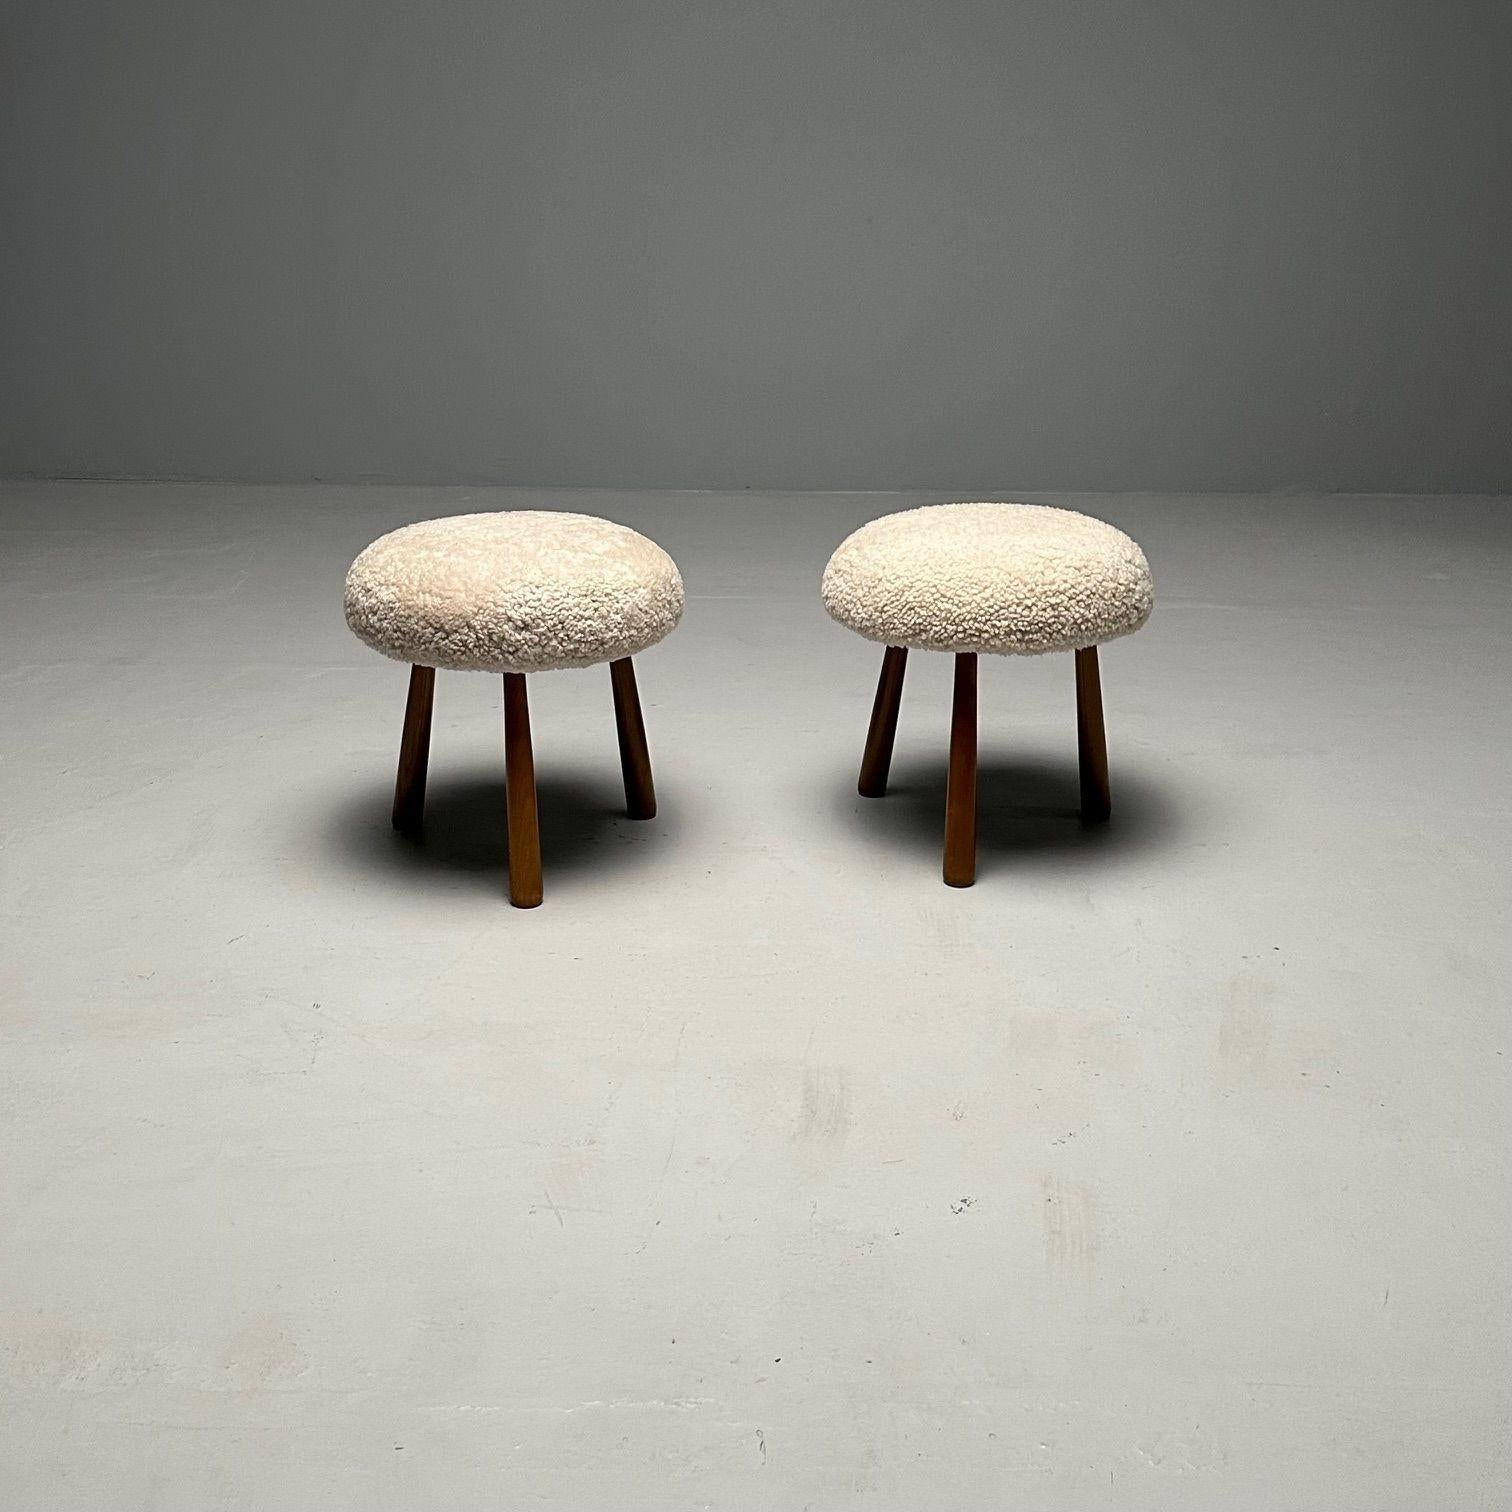 American Pair Contemporary Sheepskin Stools / Ottomans, Swedish Modern Style, Shearling For Sale